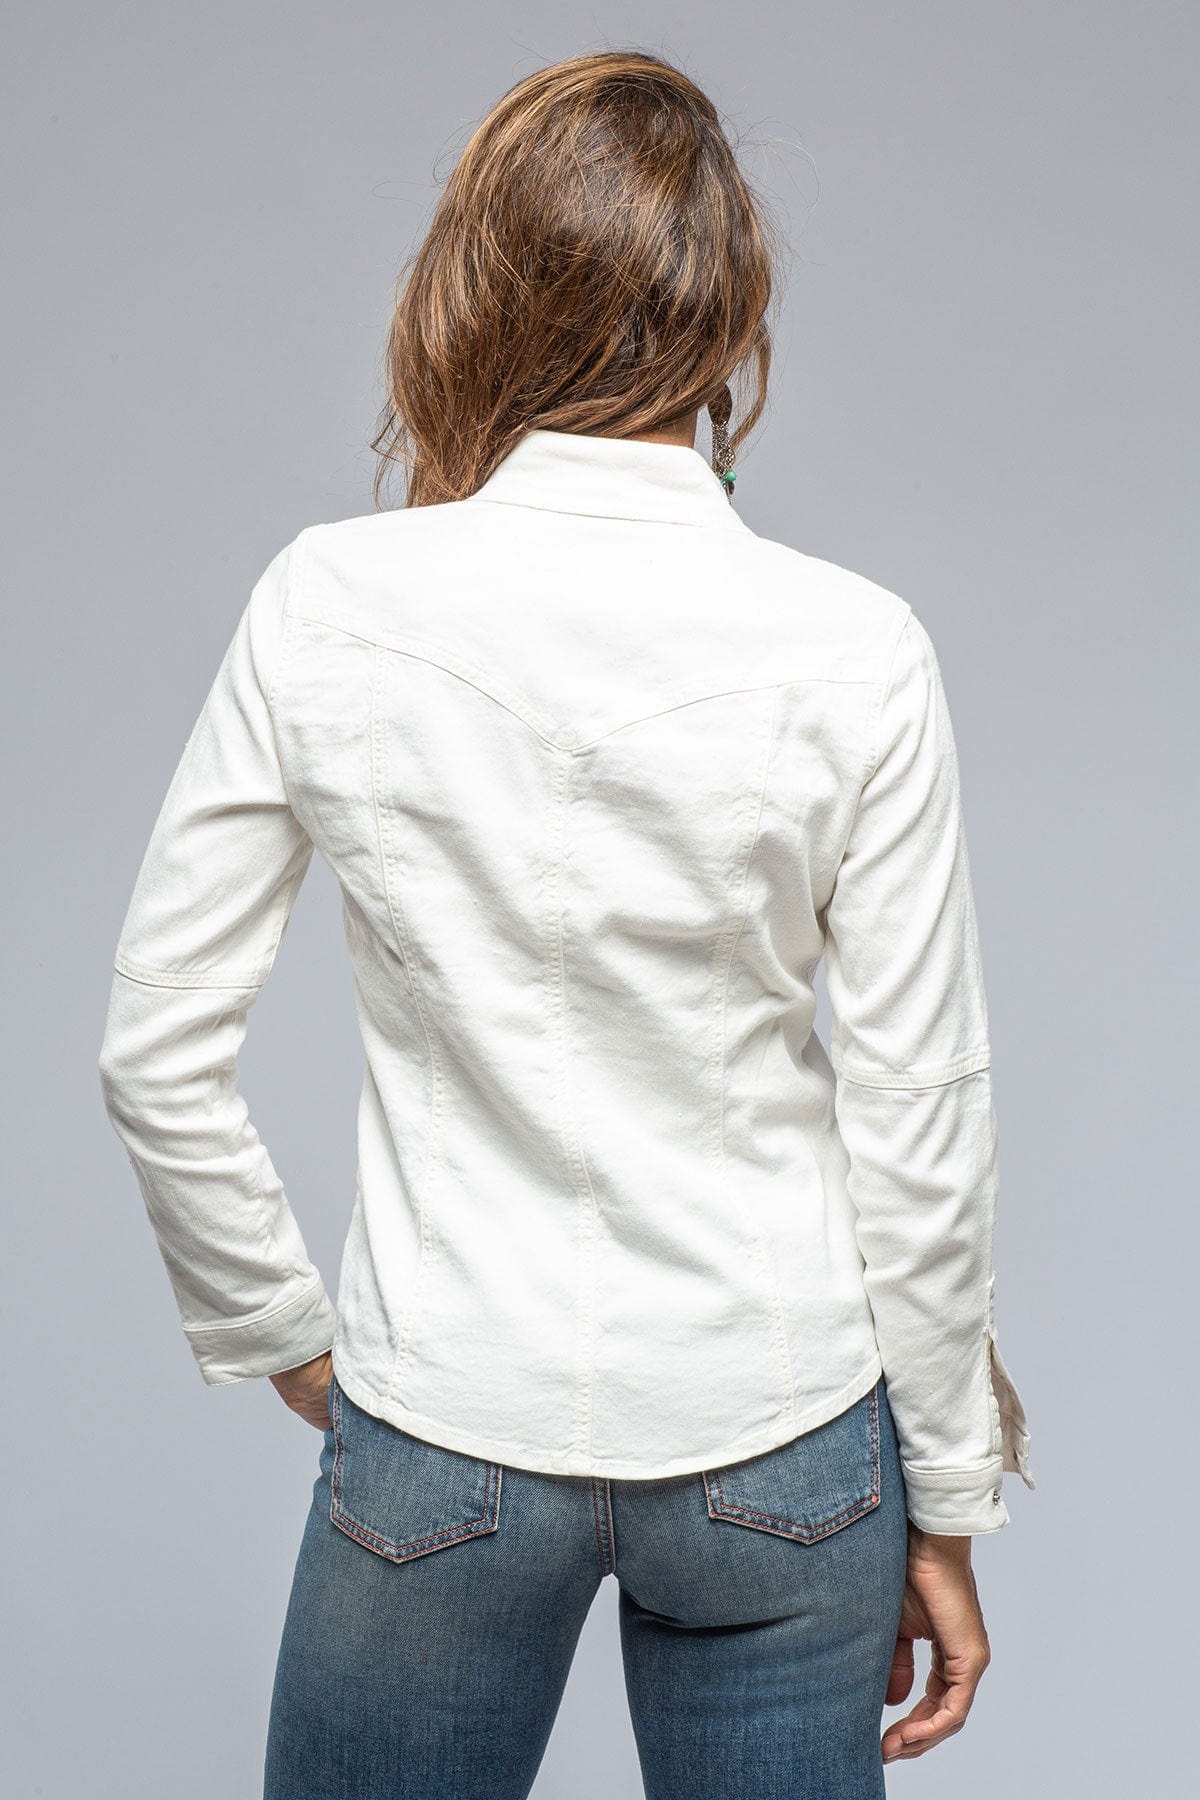 Yarmony Linen Cotton Denim Shirt In Off White - AXEL'S